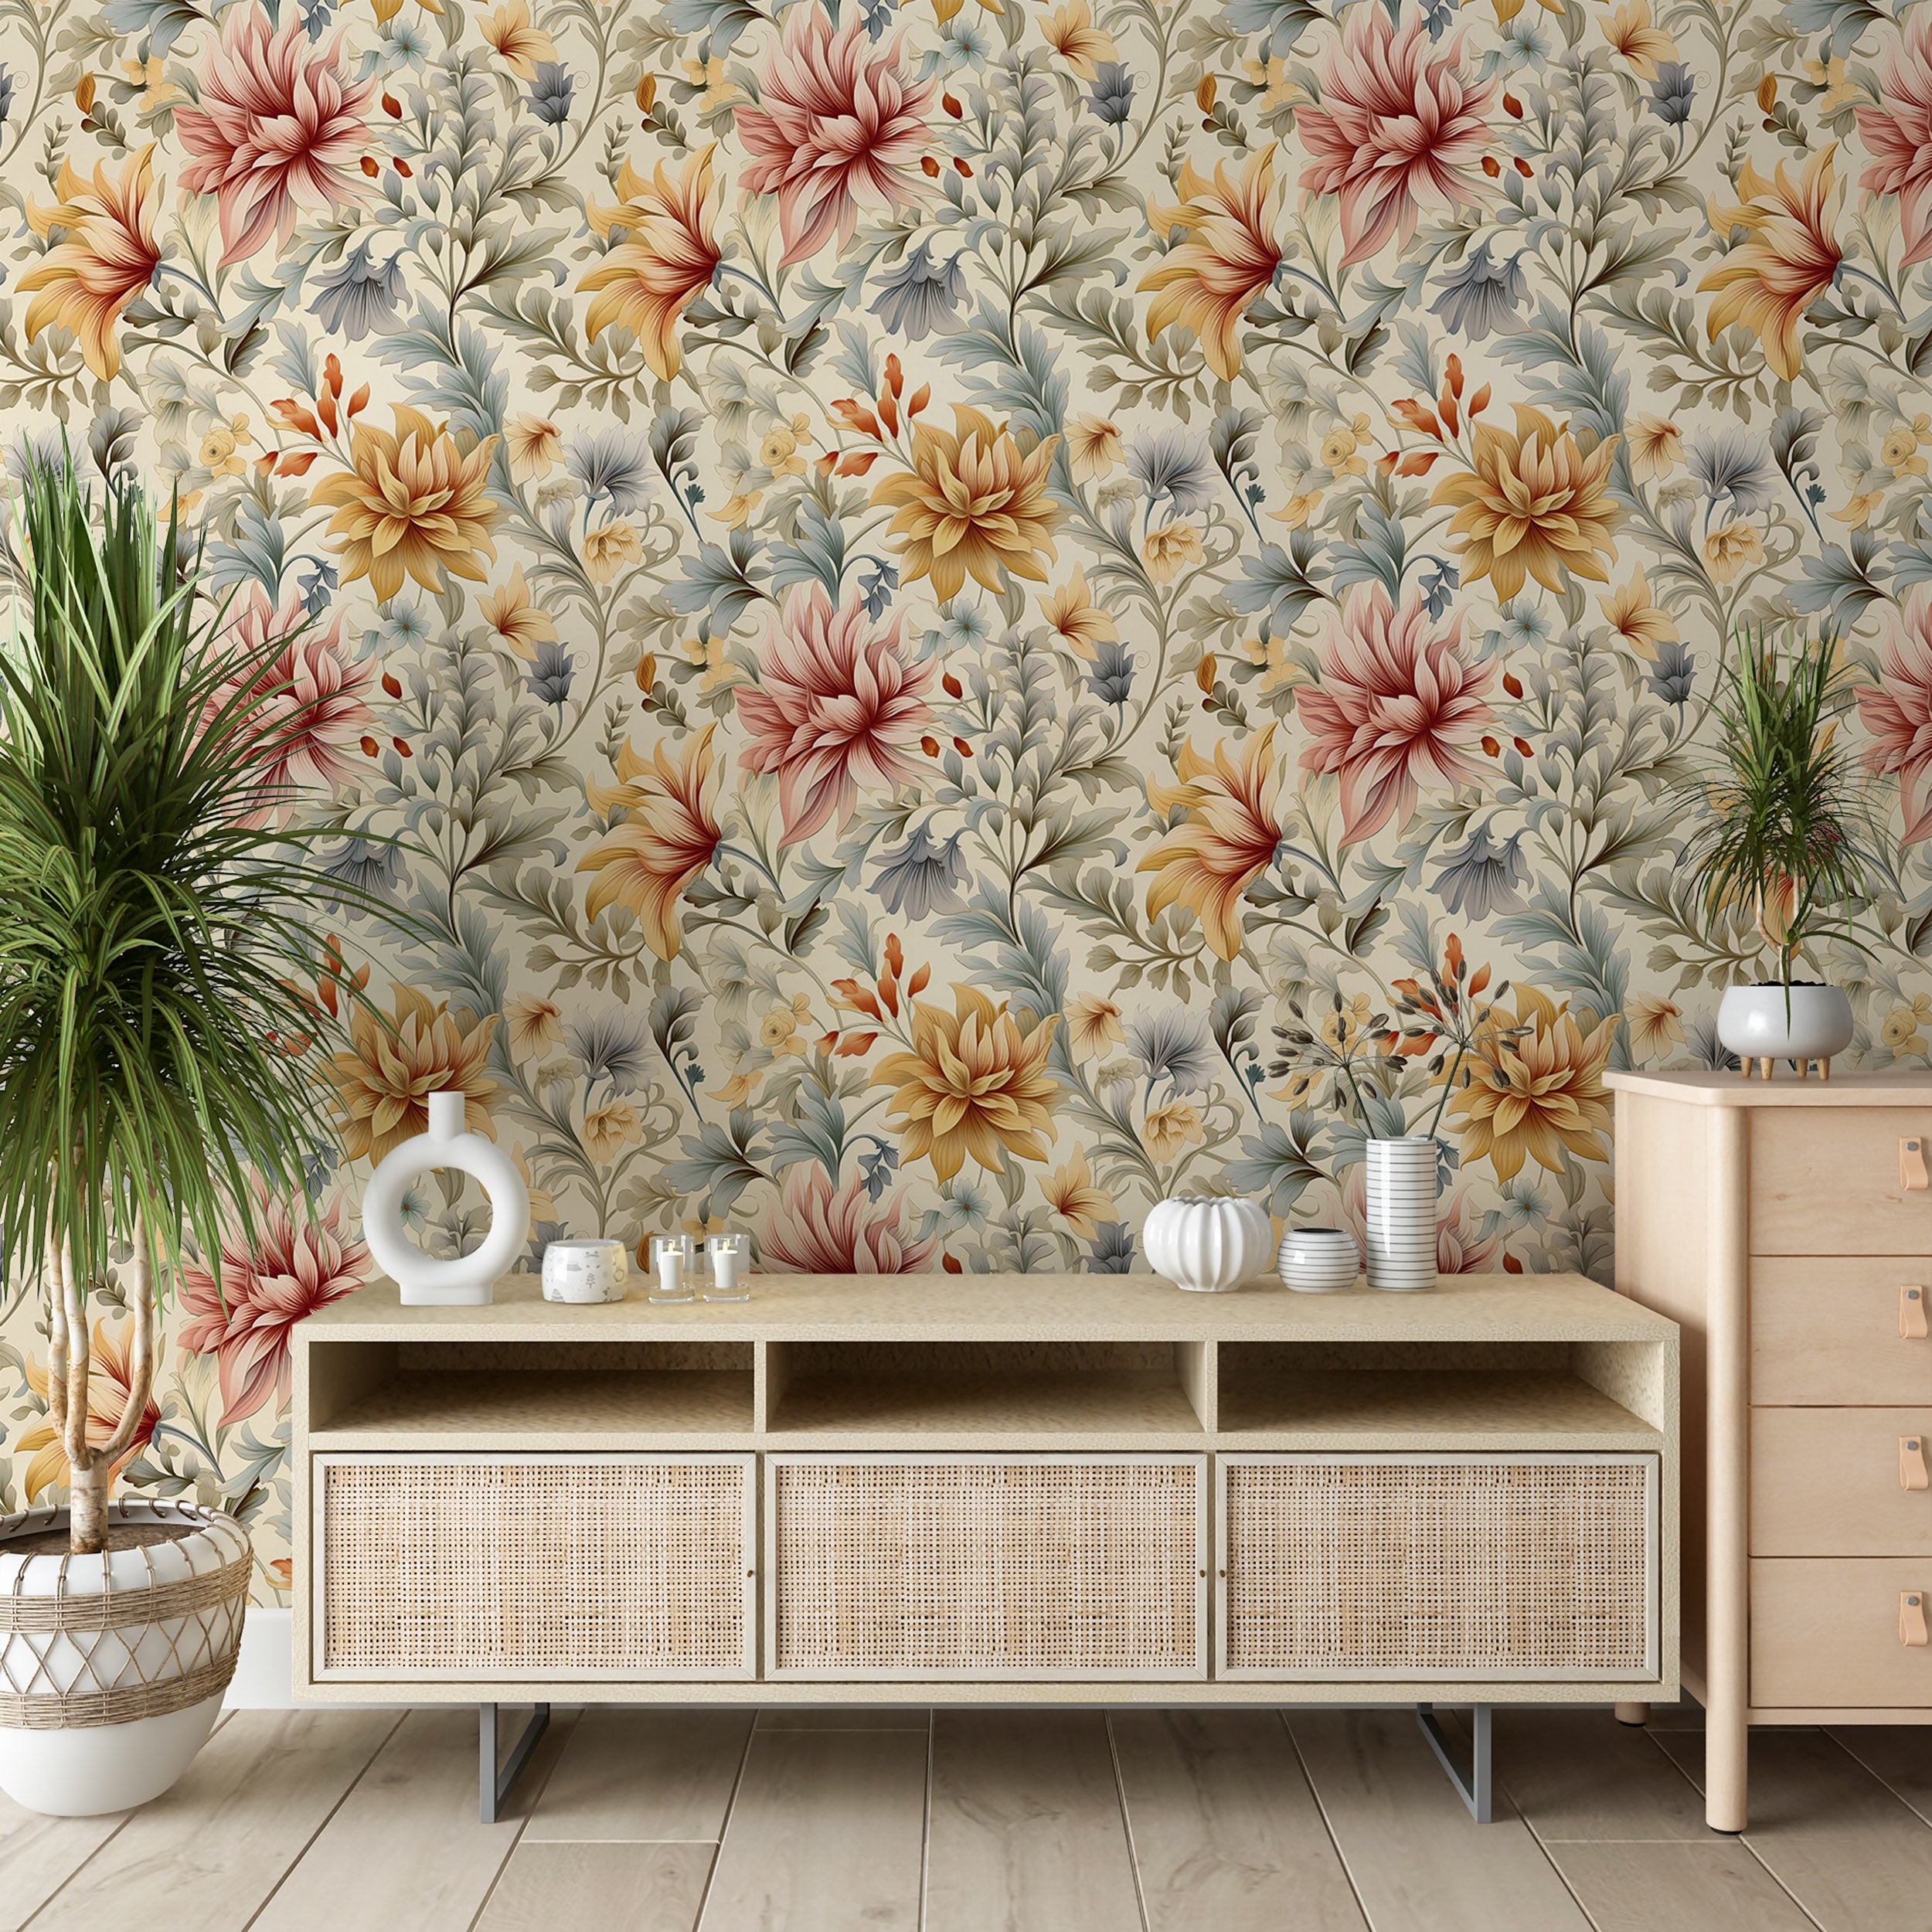 Easy Application Peel and Stick Floral Wallpaper